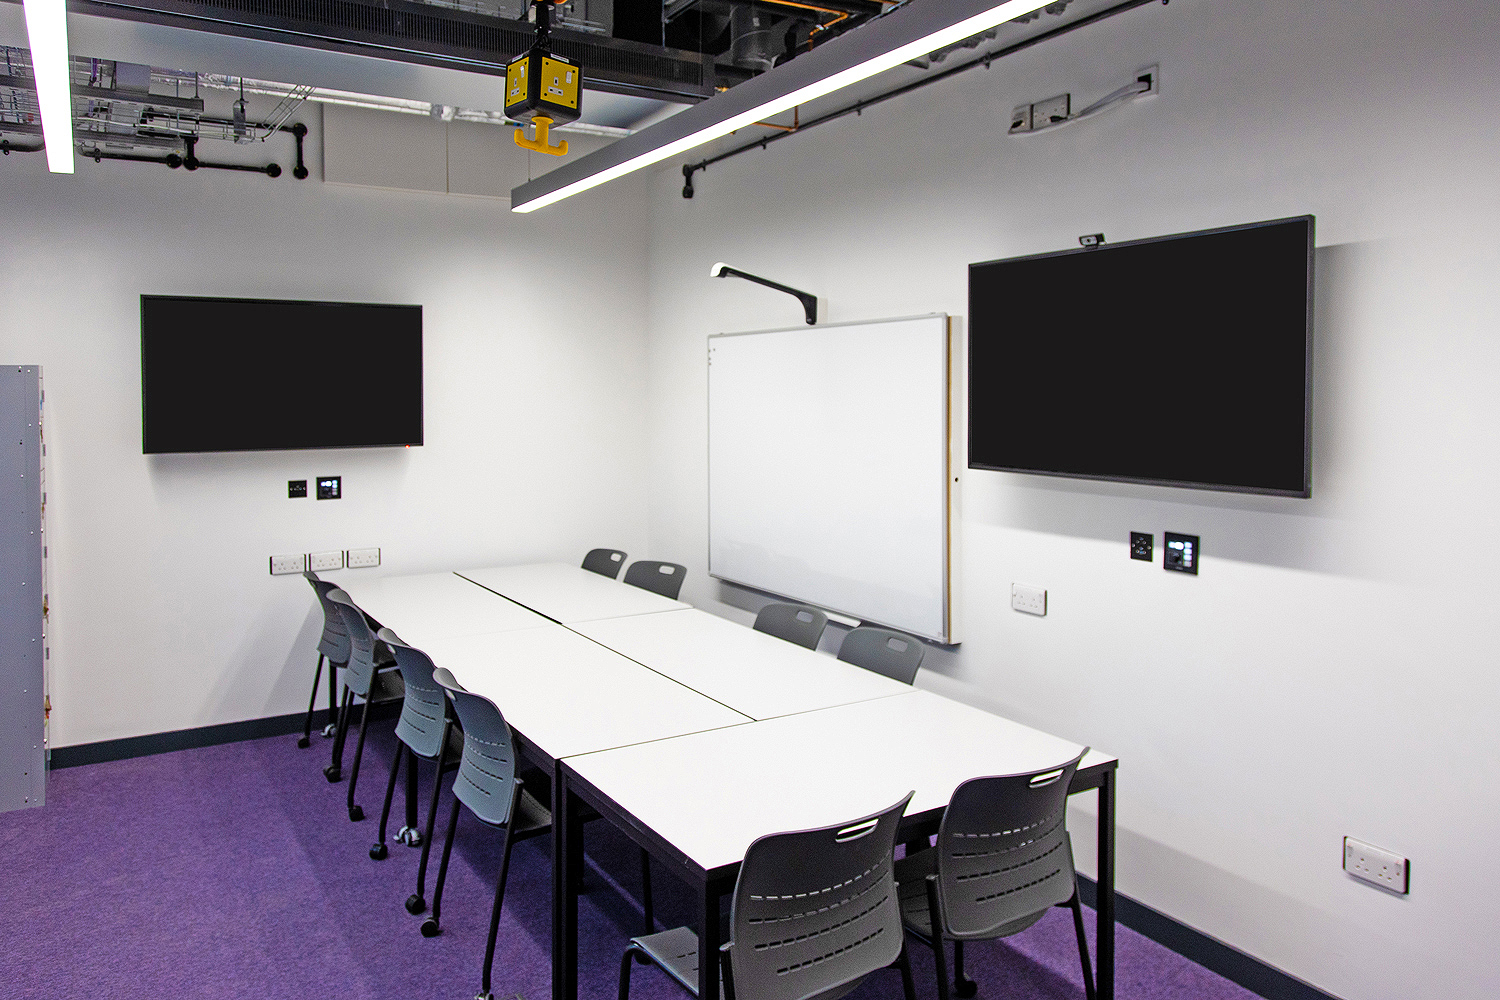 Thumbnail - Student spaces provide access to the same resources as classrooms. An Extron MediaLink controller and a network button panel enable source selection and local display control.